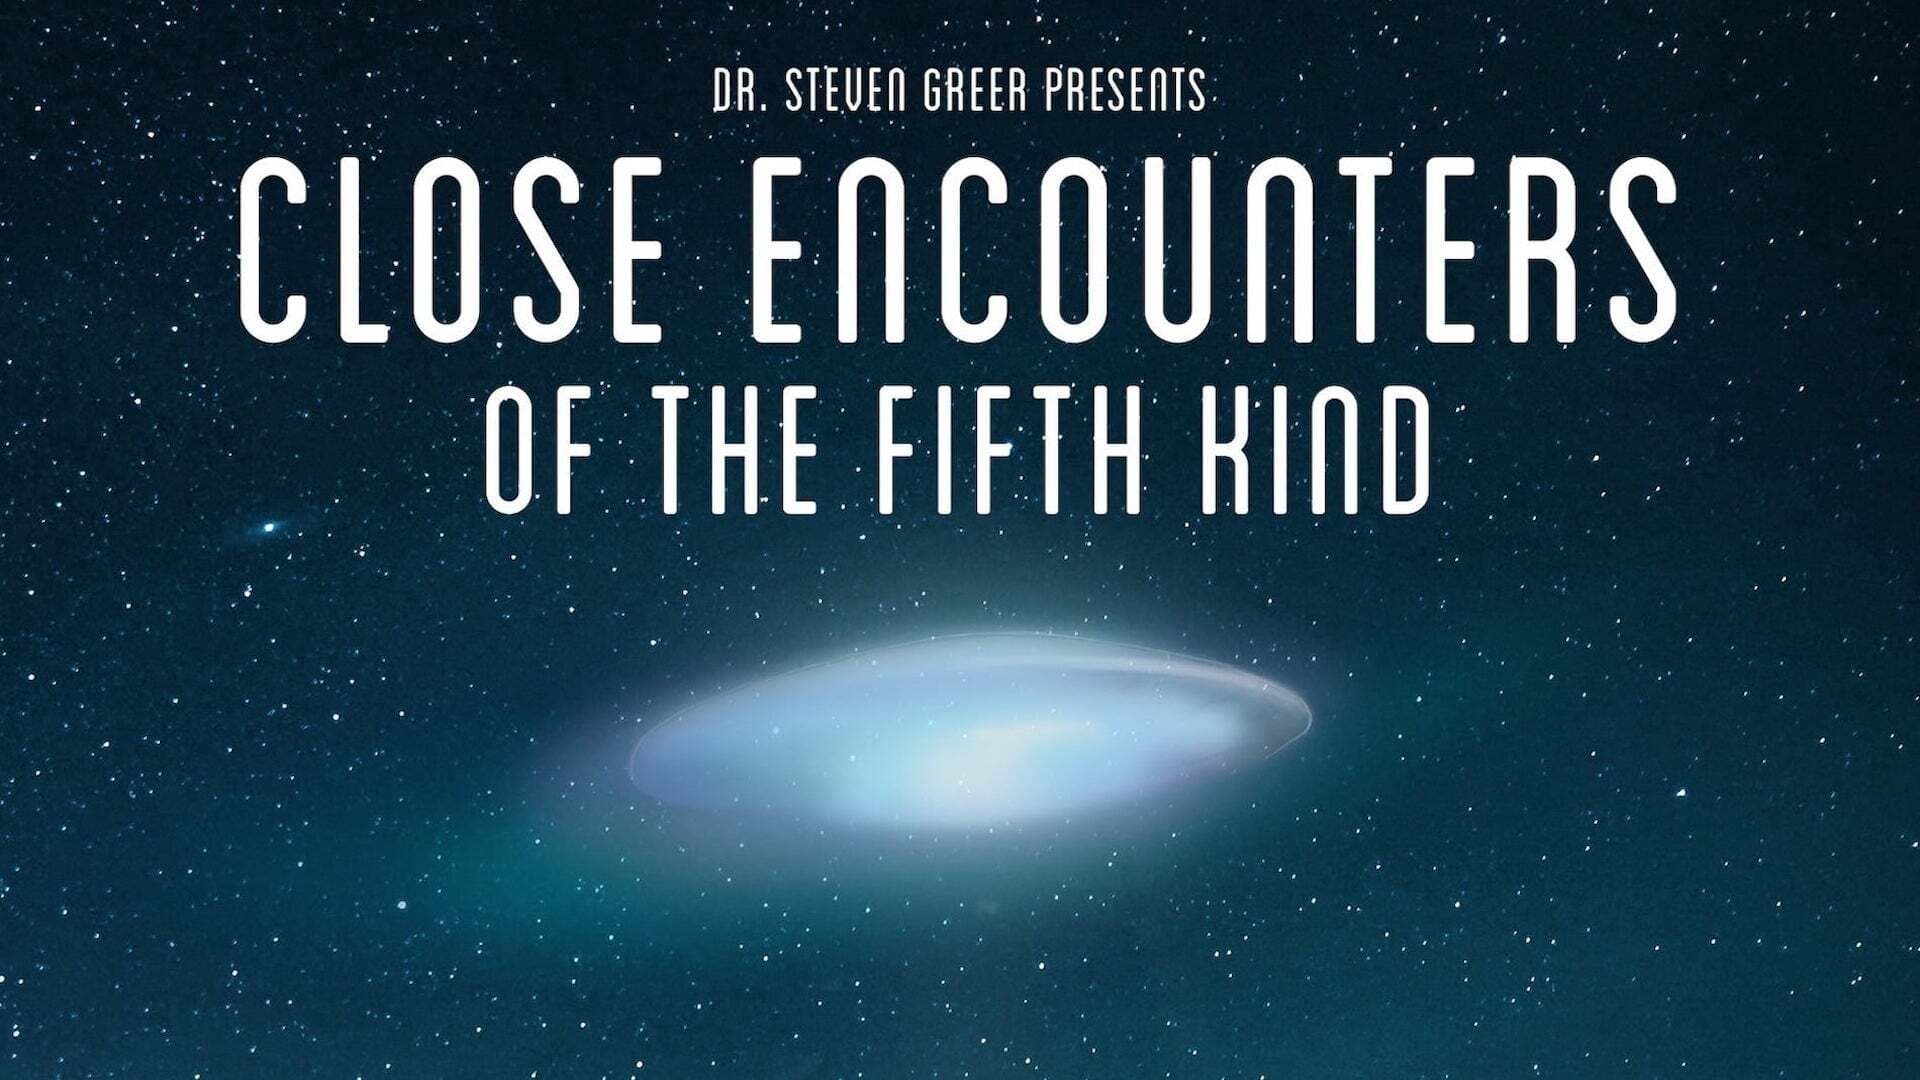 Close Encounters of the Fifth Kind (2020)